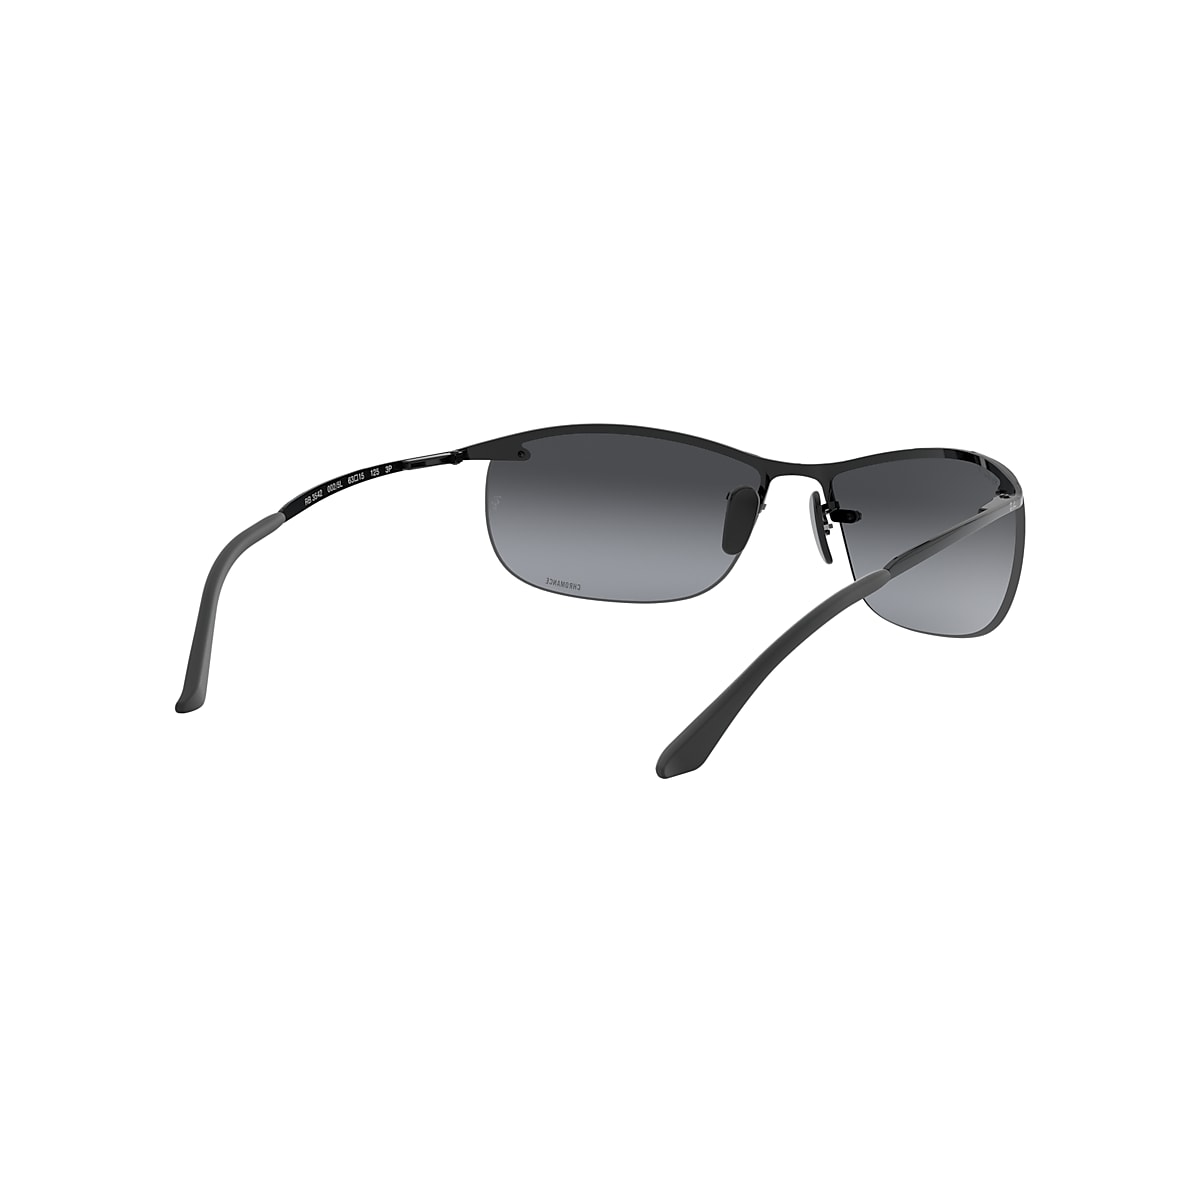 RB3542 CHROMANCE Sunglasses in Black and Grey - RB3542 | Ray-Ban® US